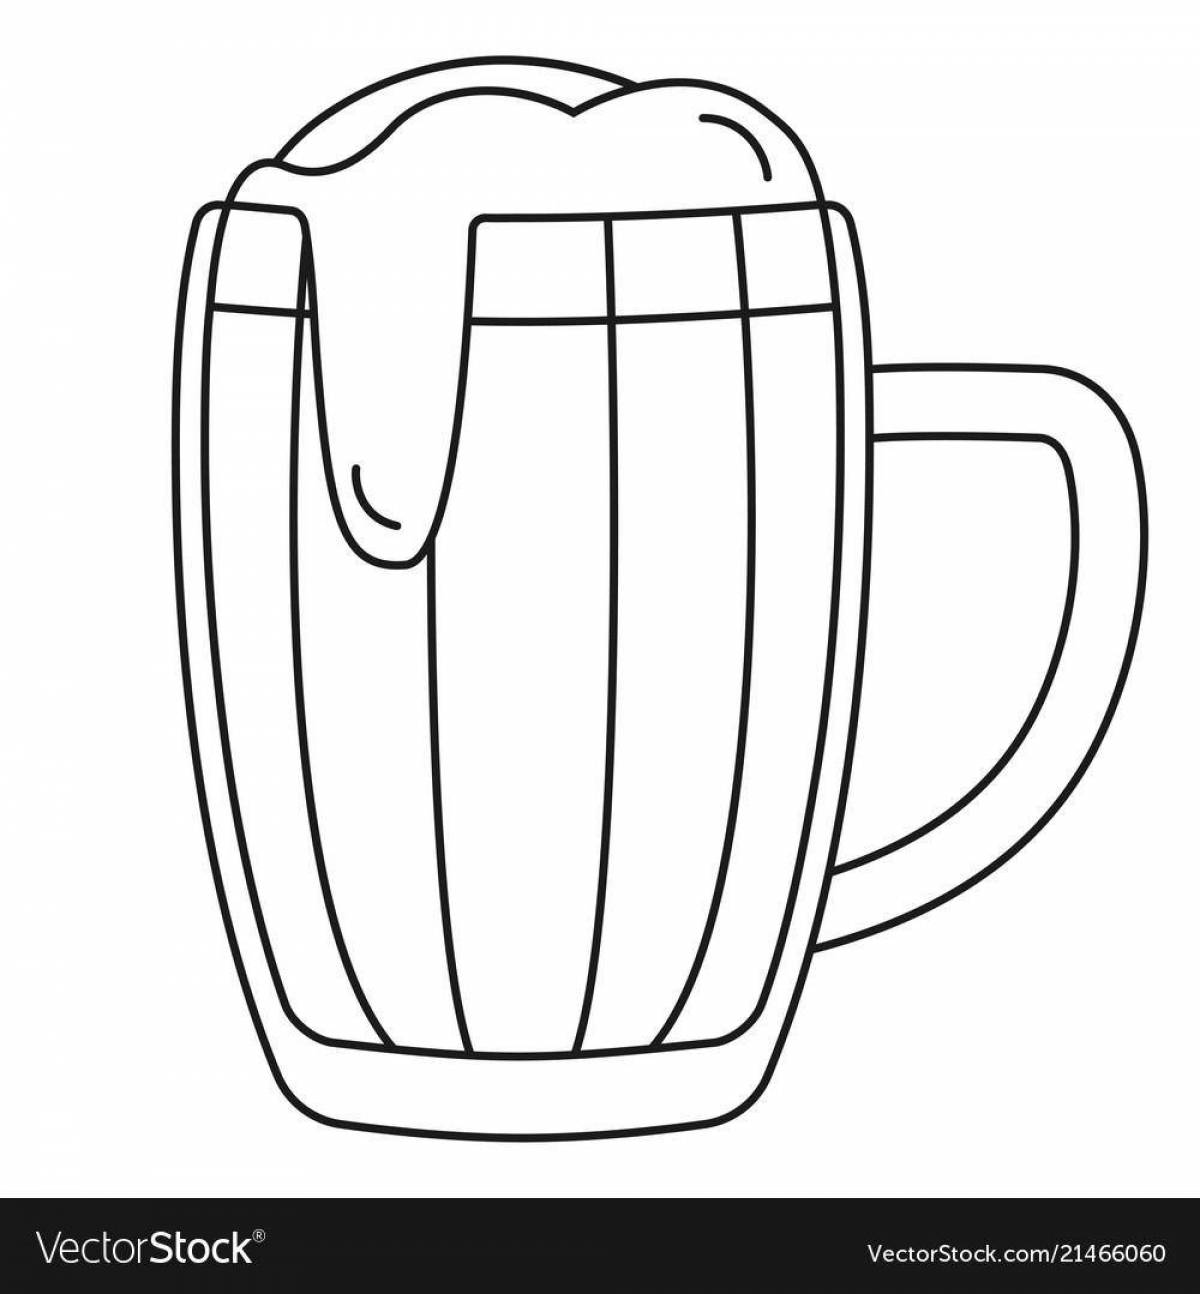 Chilled beer mug coloring page